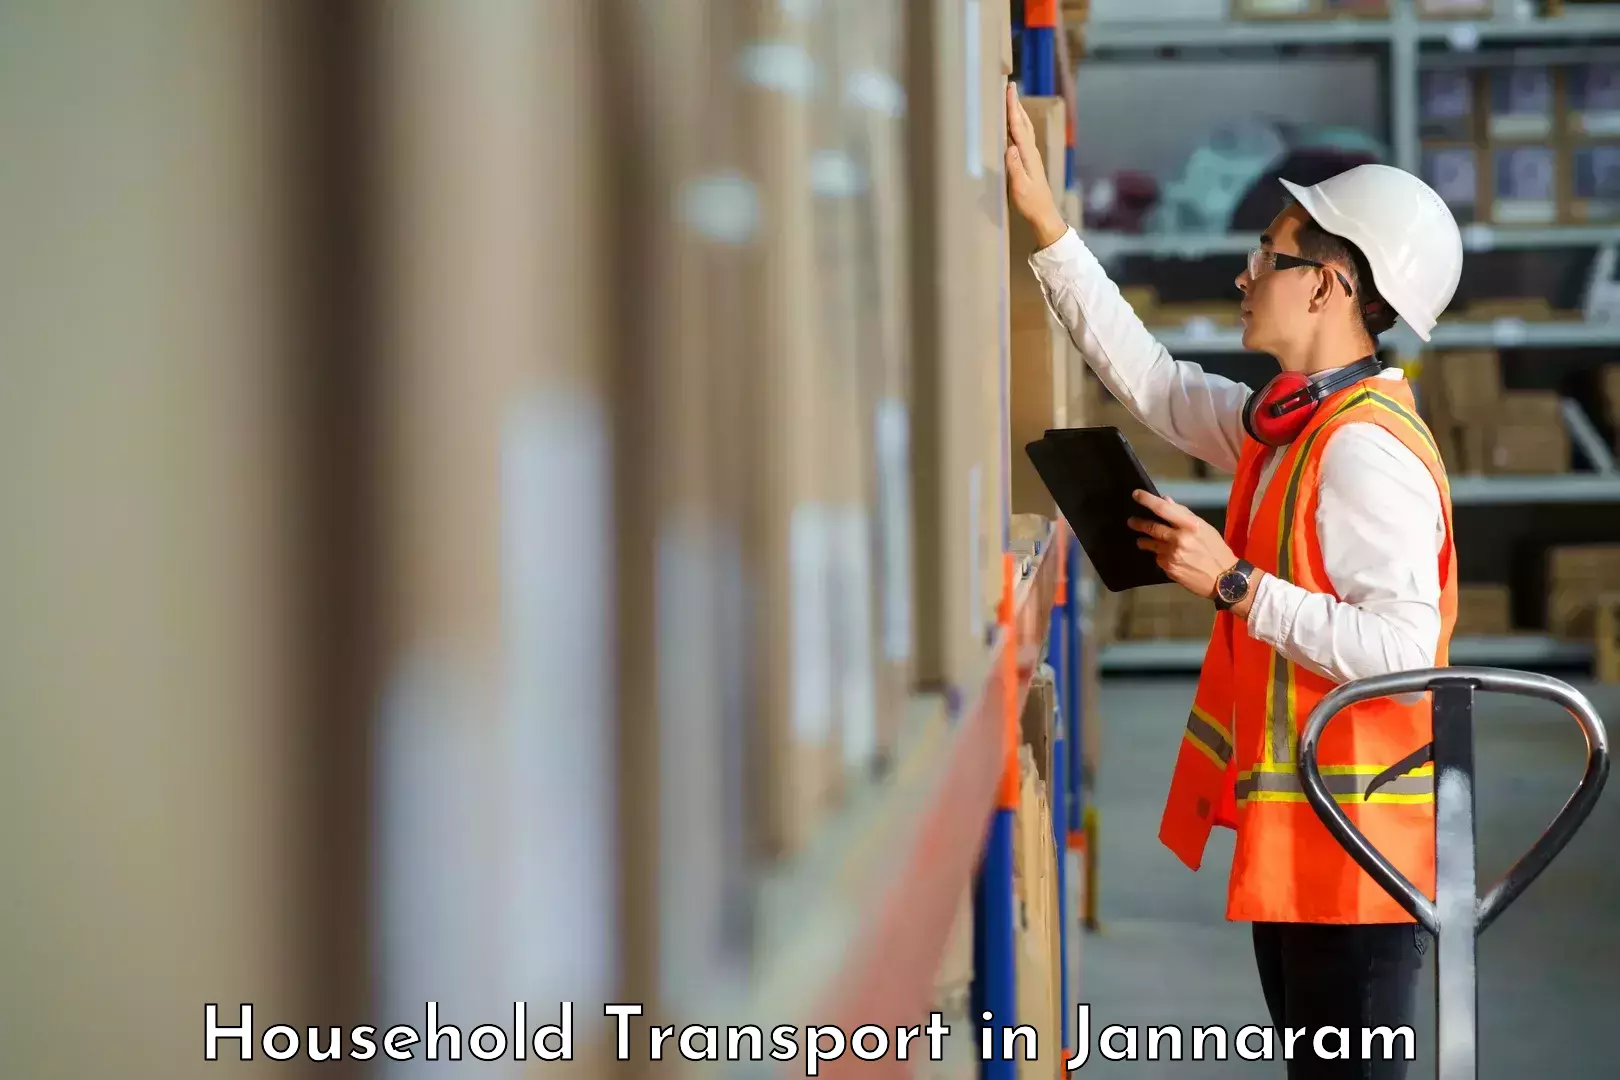 Home goods moving company in Jannaram